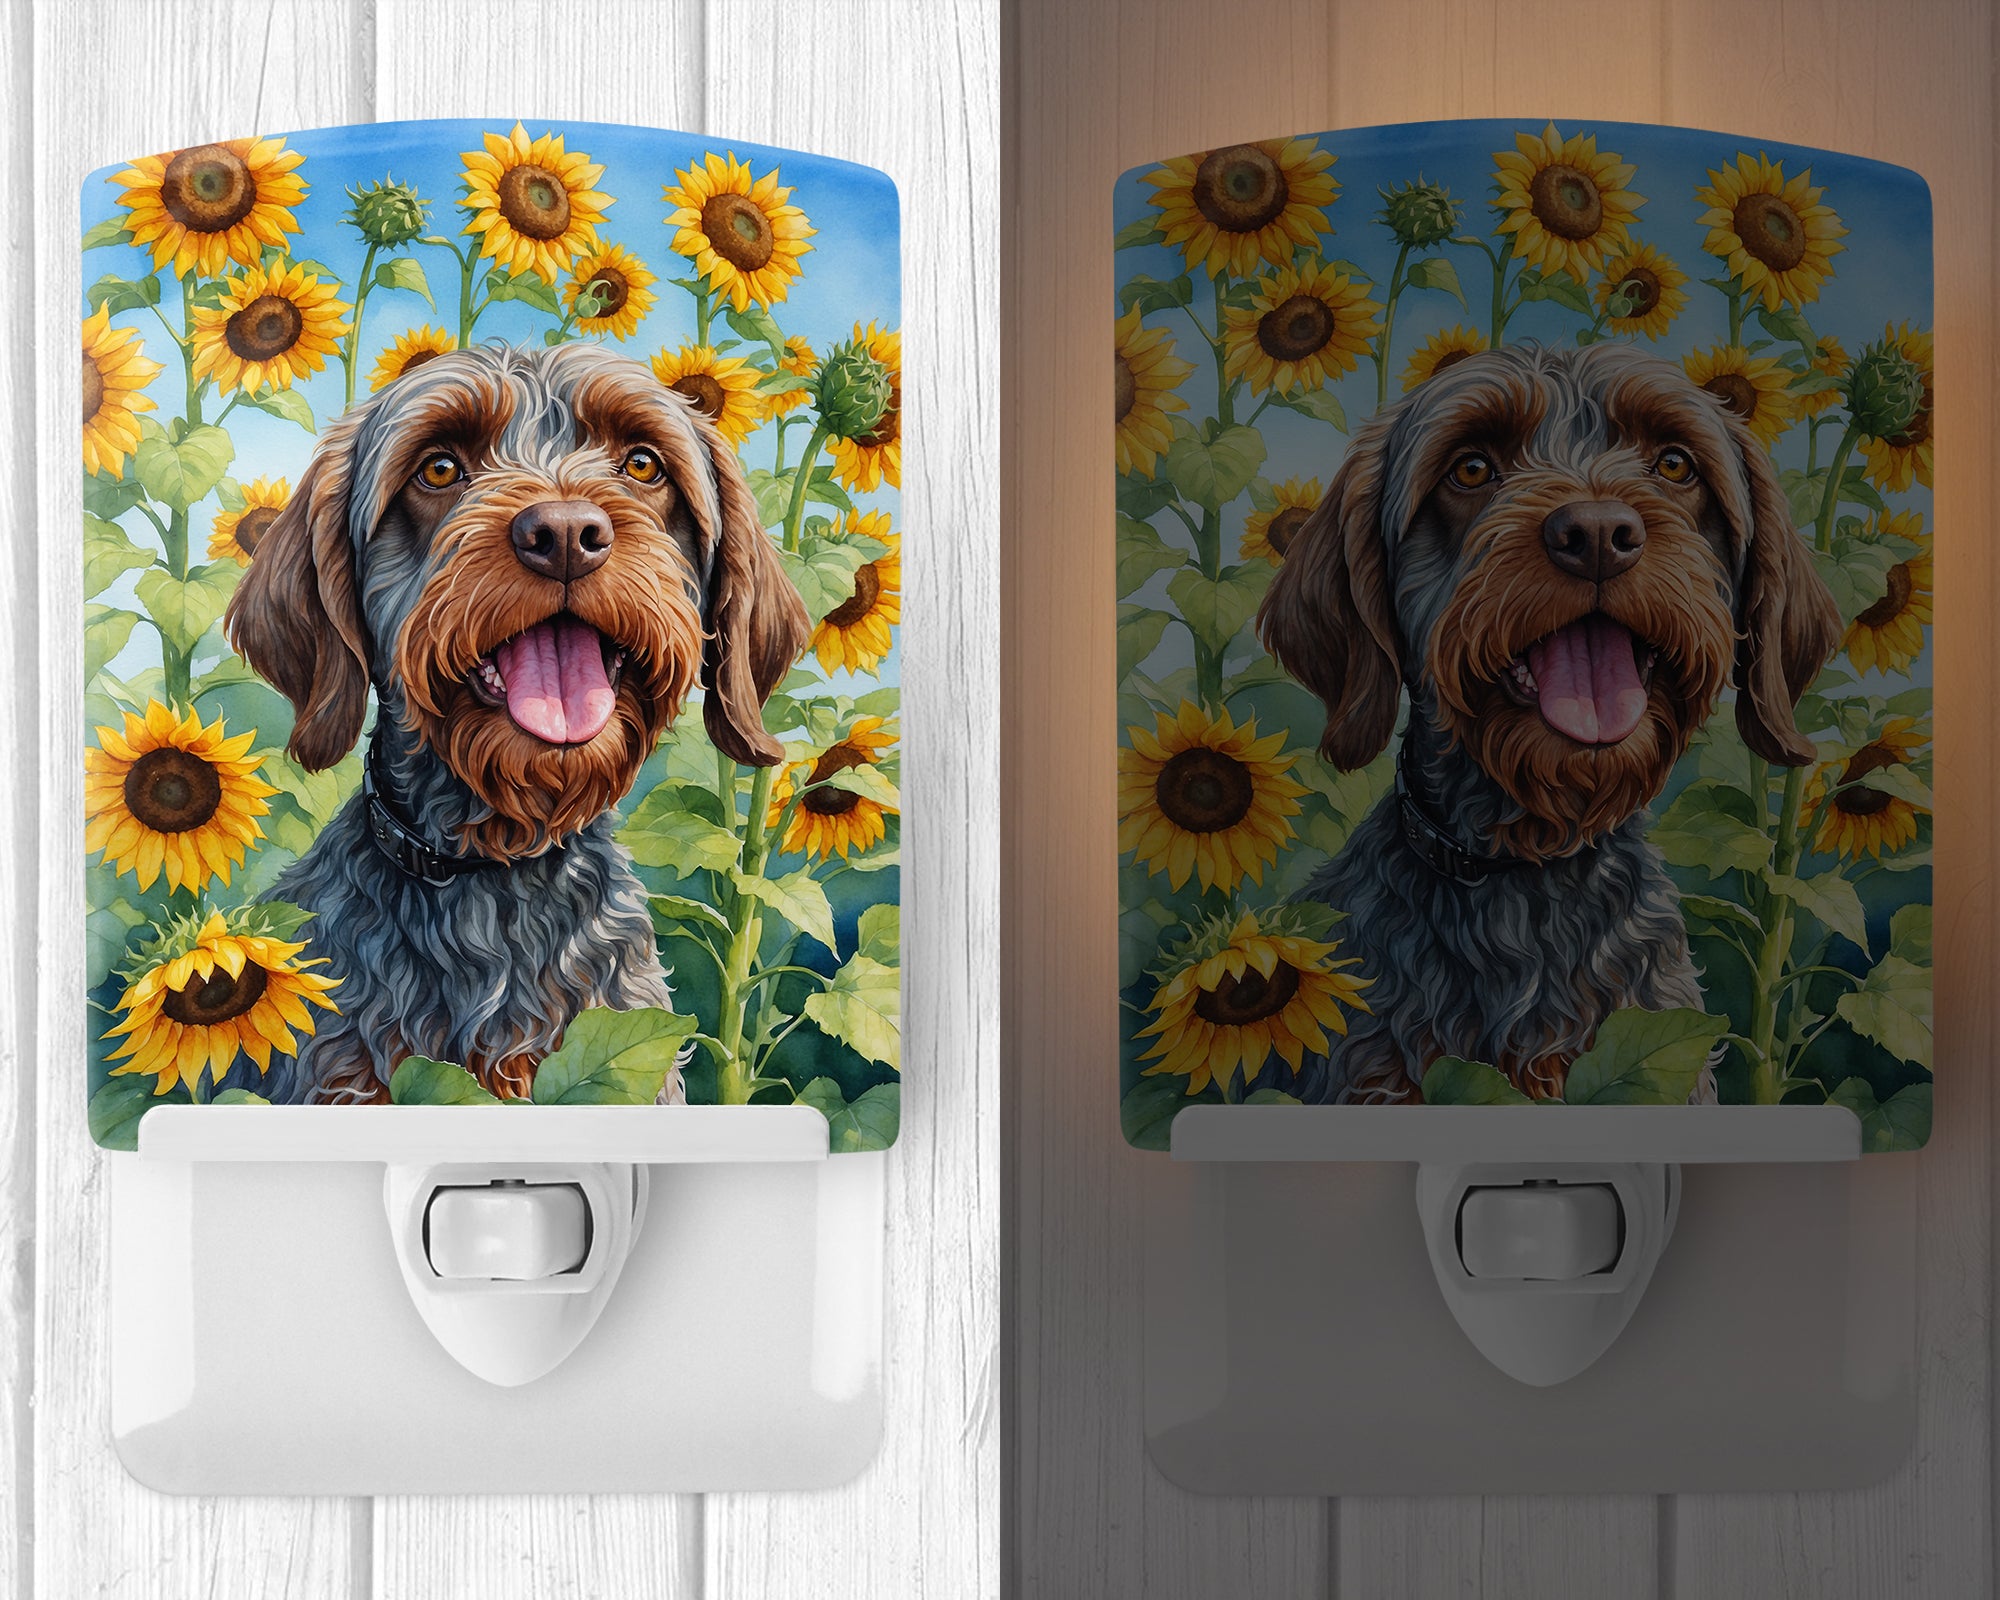 Wirehaired Pointing Griffon in Sunflowers Ceramic Night Light